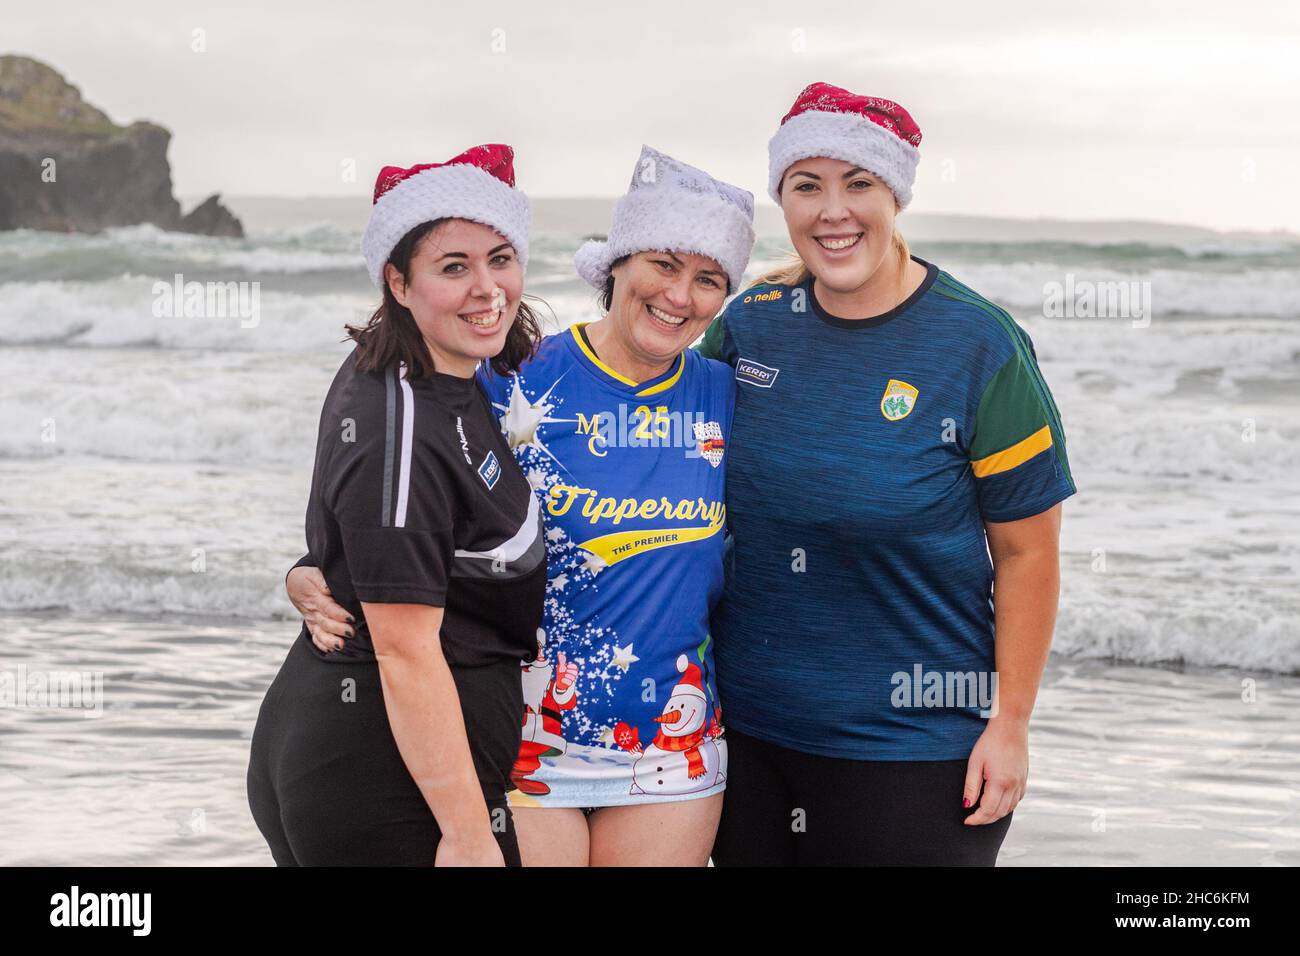 Rosscarbery, West Cork, Ireland. 25th Dec, 2021. Hundreds of people descended on The Warren Beach this morning to partake in a Christmas swim in aid of Rosscarbery Social Services & CRY (Cardiac Risk in the Young). At the swim were Denise, Eilish and Caitriona Brennan from Cork. Credit: AG News/Alamy Live News Stock Photo